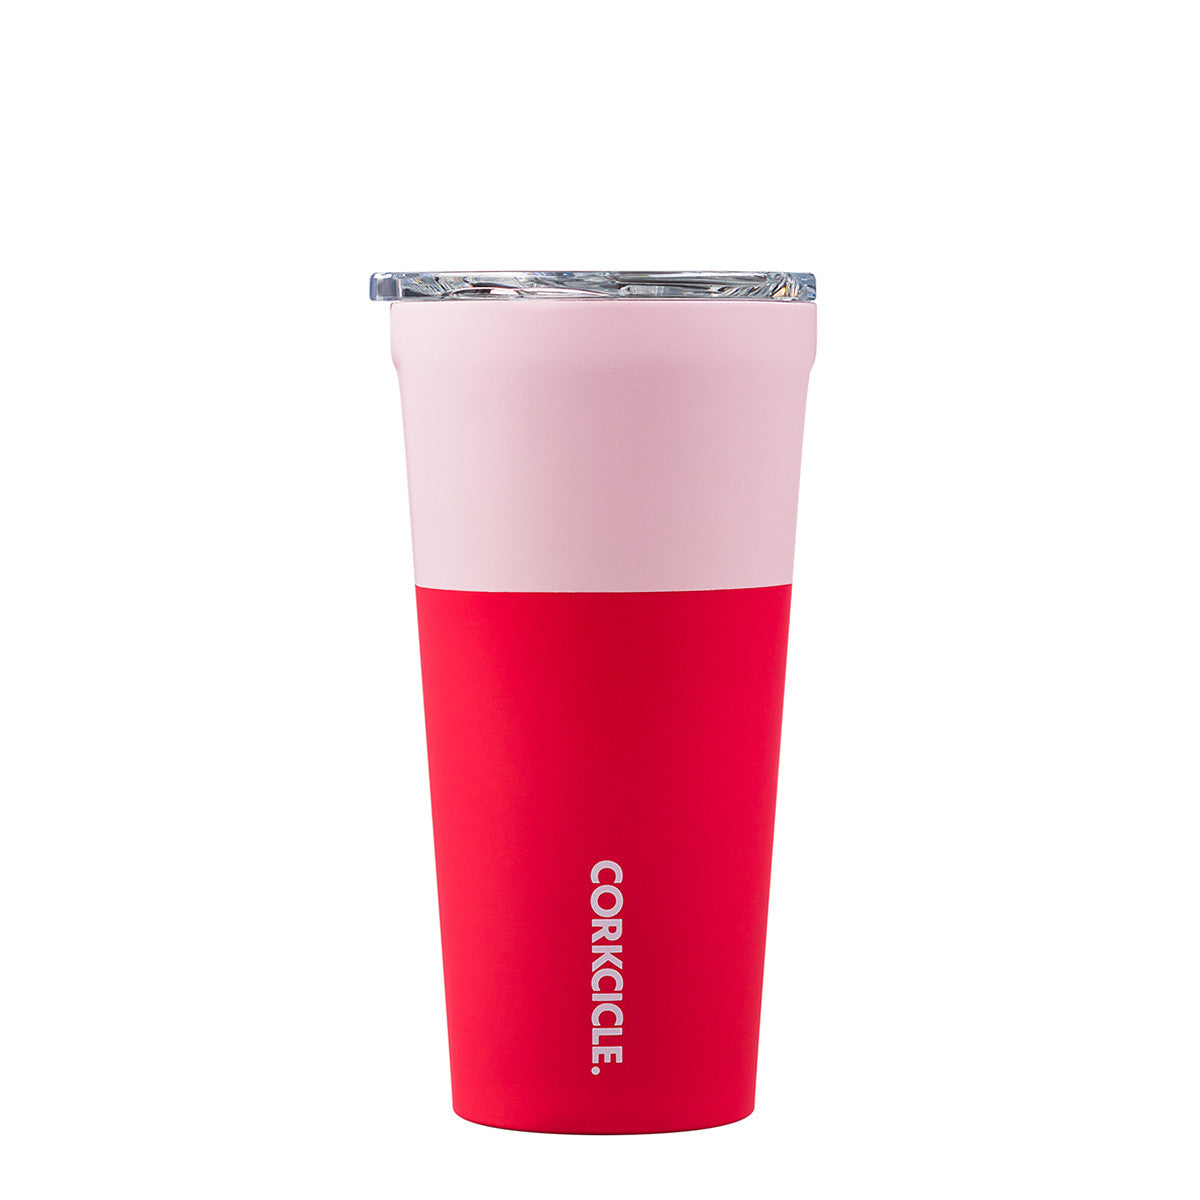 Corkcicle Colour Block Tumbler 475ml - Shortcake Insulated Stainless Steel Cup